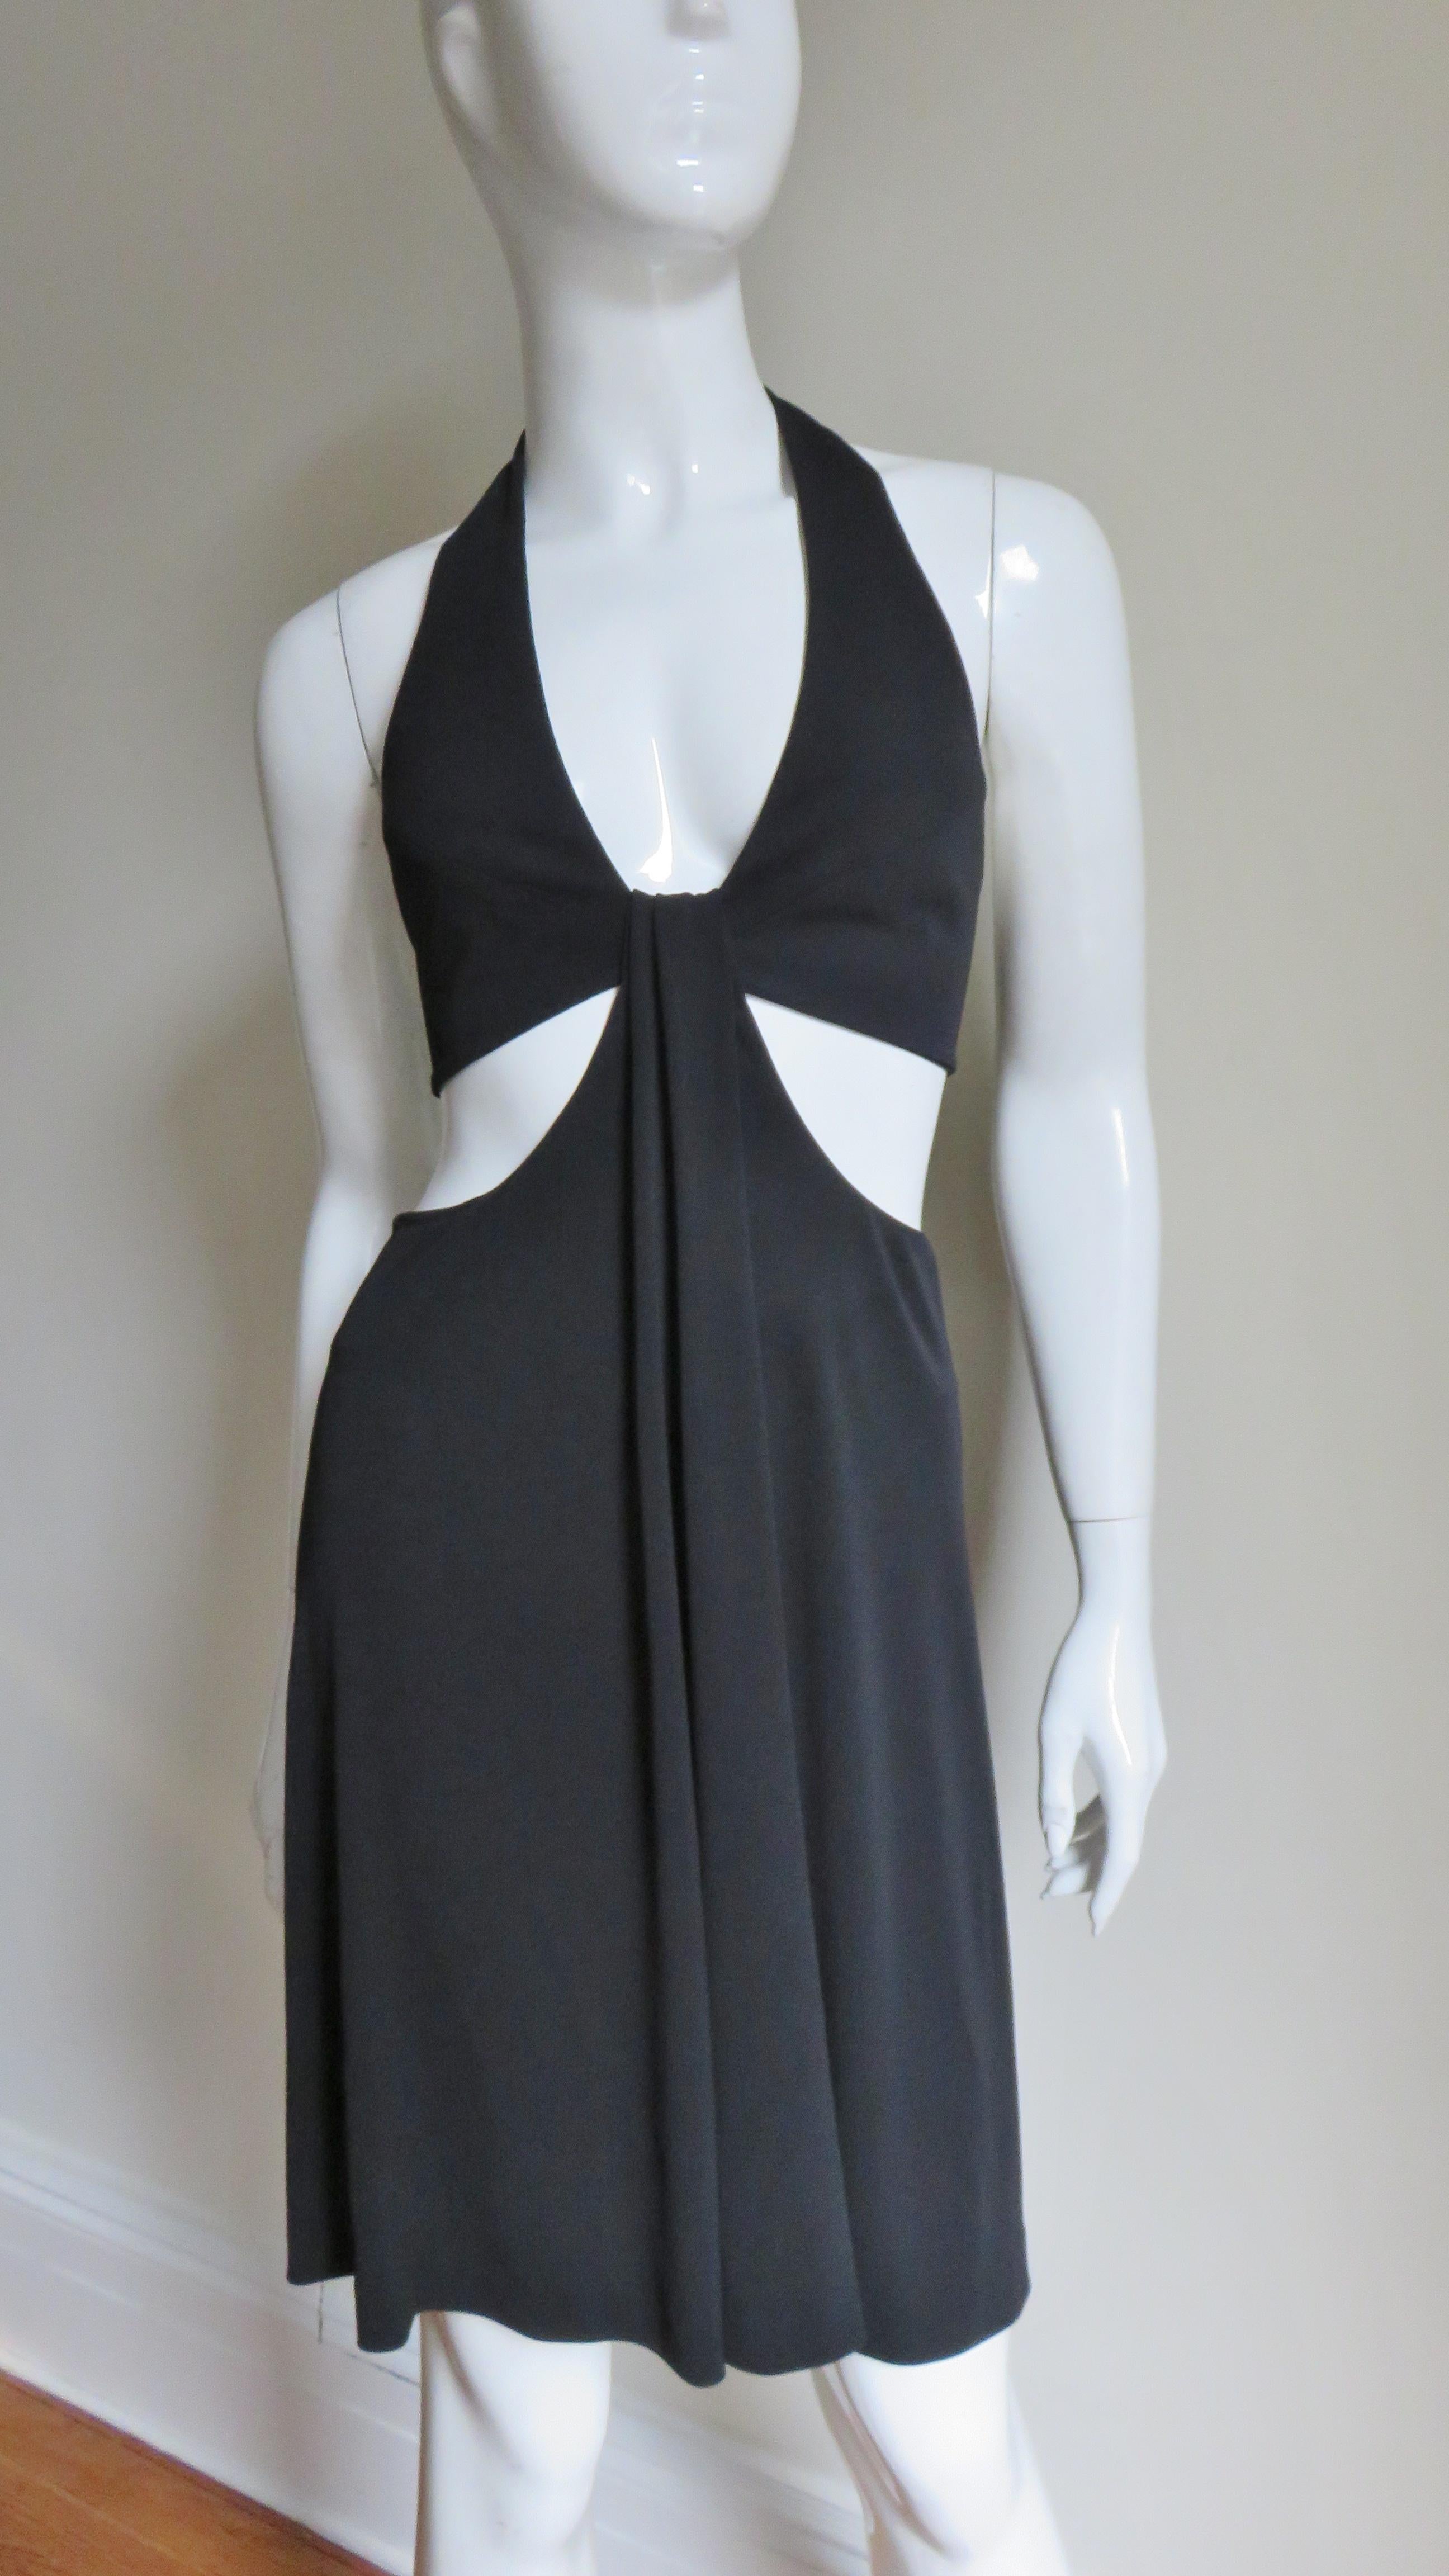 A gorgeous black jersey dress by Herve Leger. Always a master of enhancing the female form this dress is no exception.  It is a halter with a plunging neckline and an exposed waist back and sides.  The back of the dress is bare to just below the